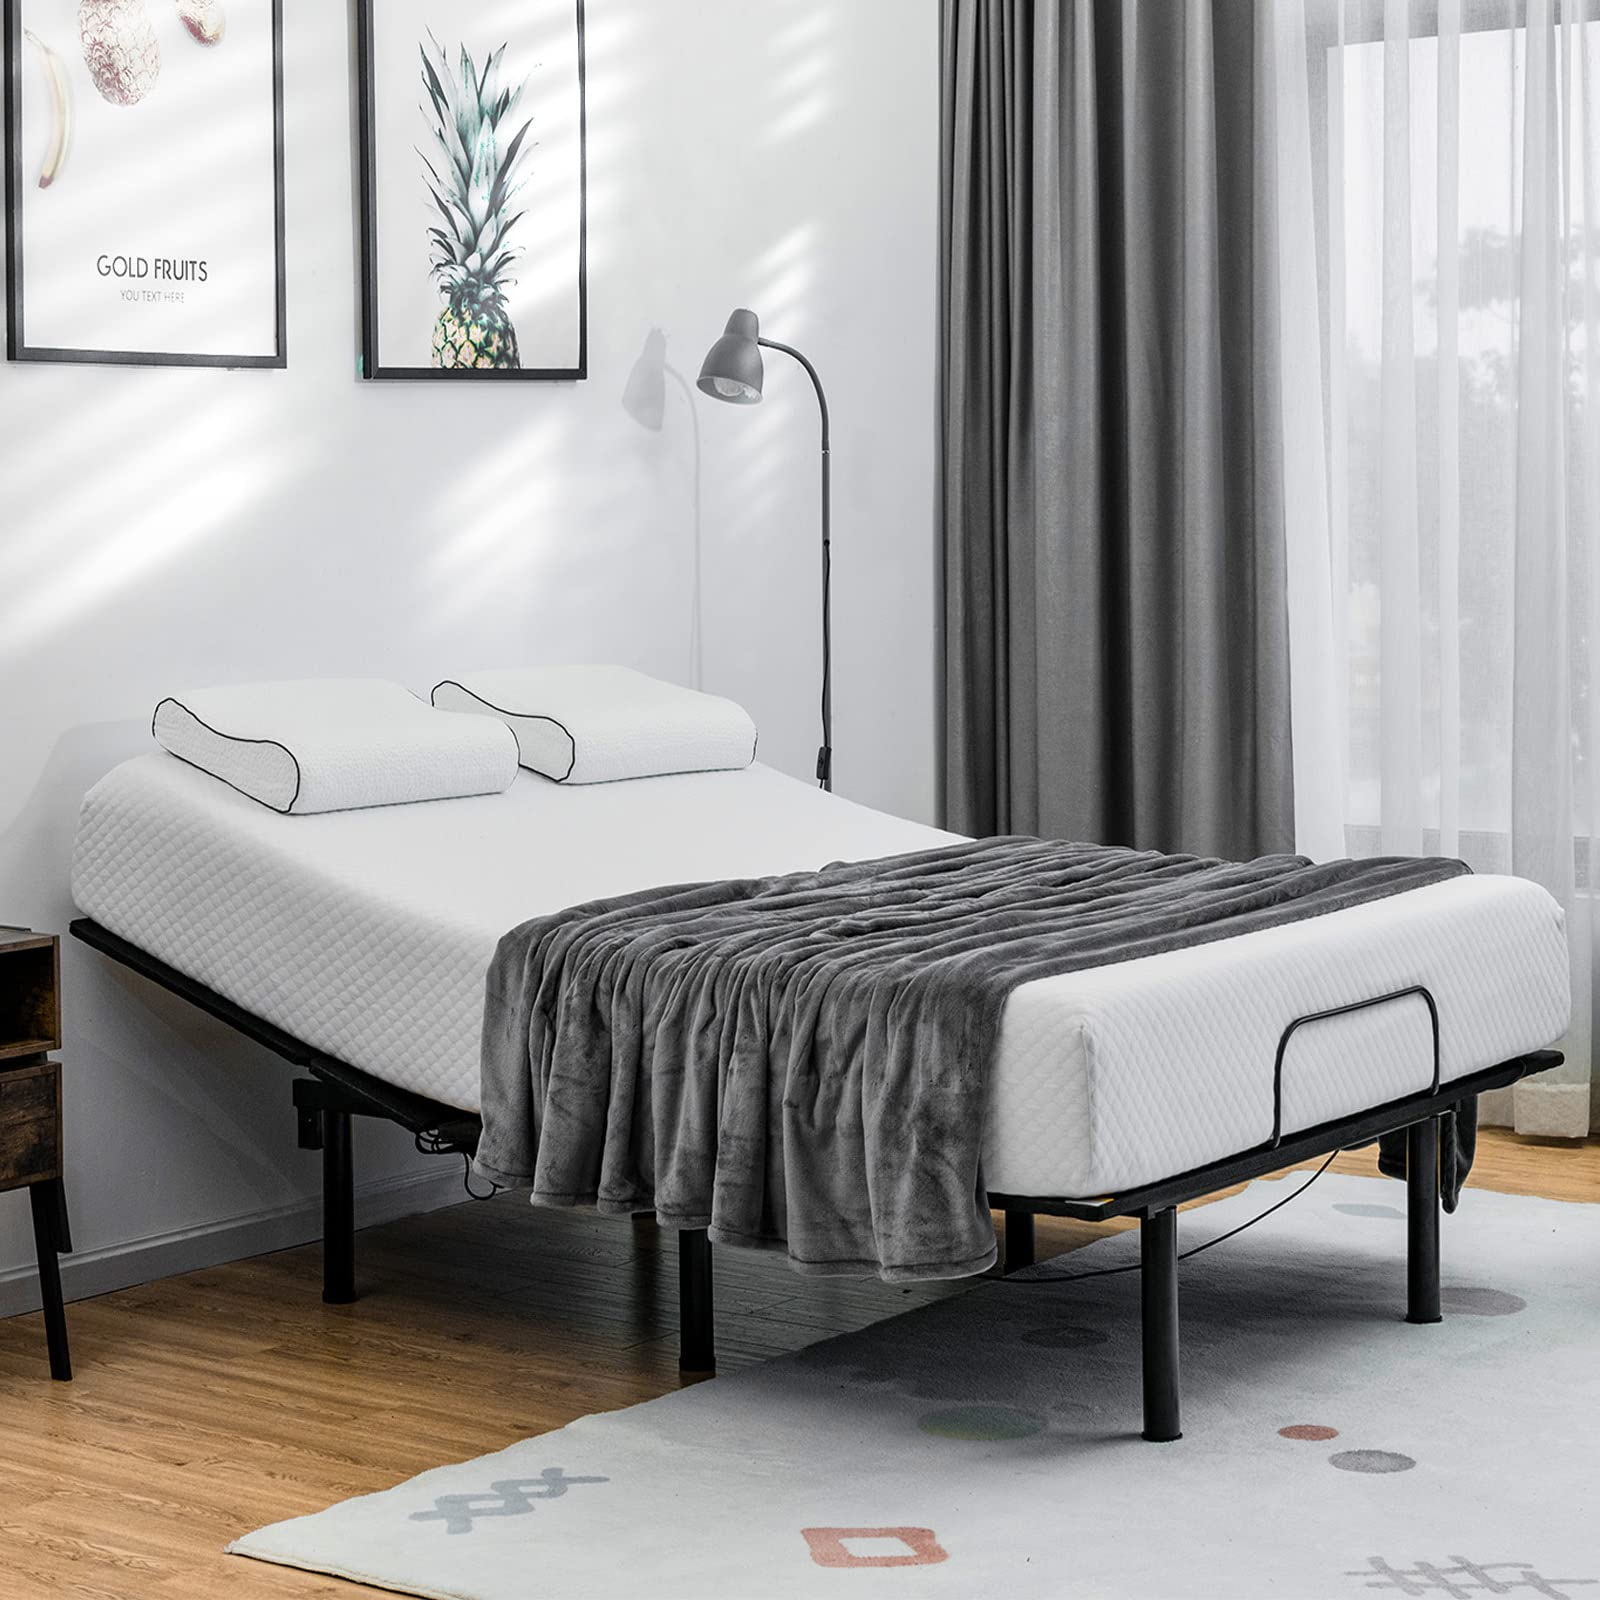 How to Choose Suitable Beds for the Bedroom?